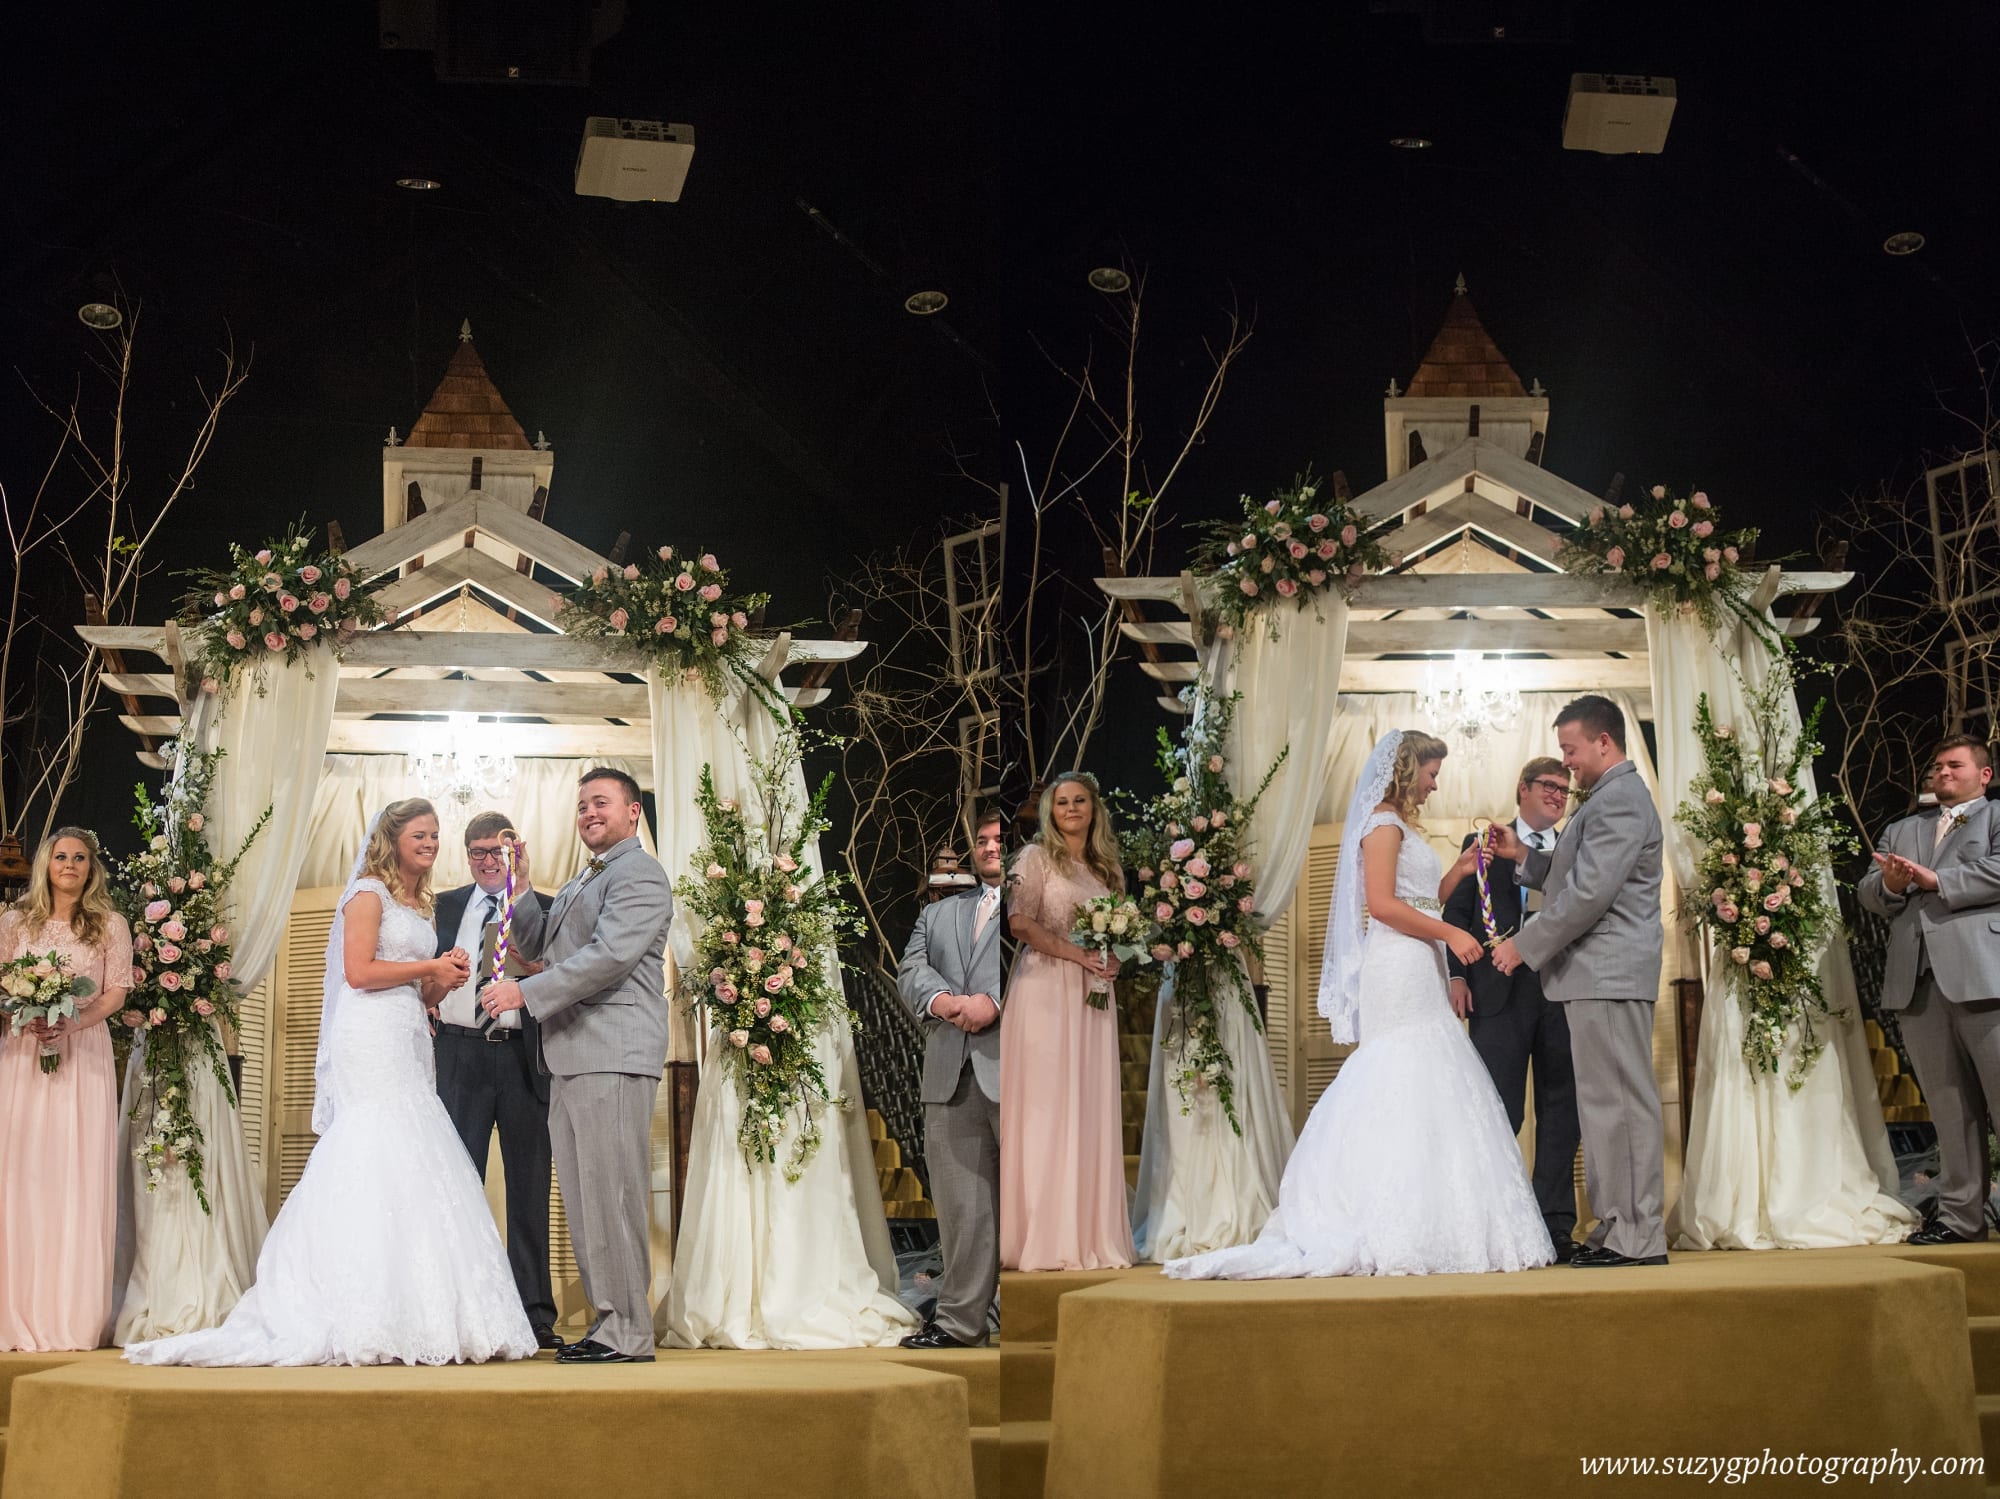 vows by victoria-lake charles-wedding-photography-suzy g-photography-suzygphotography_0059